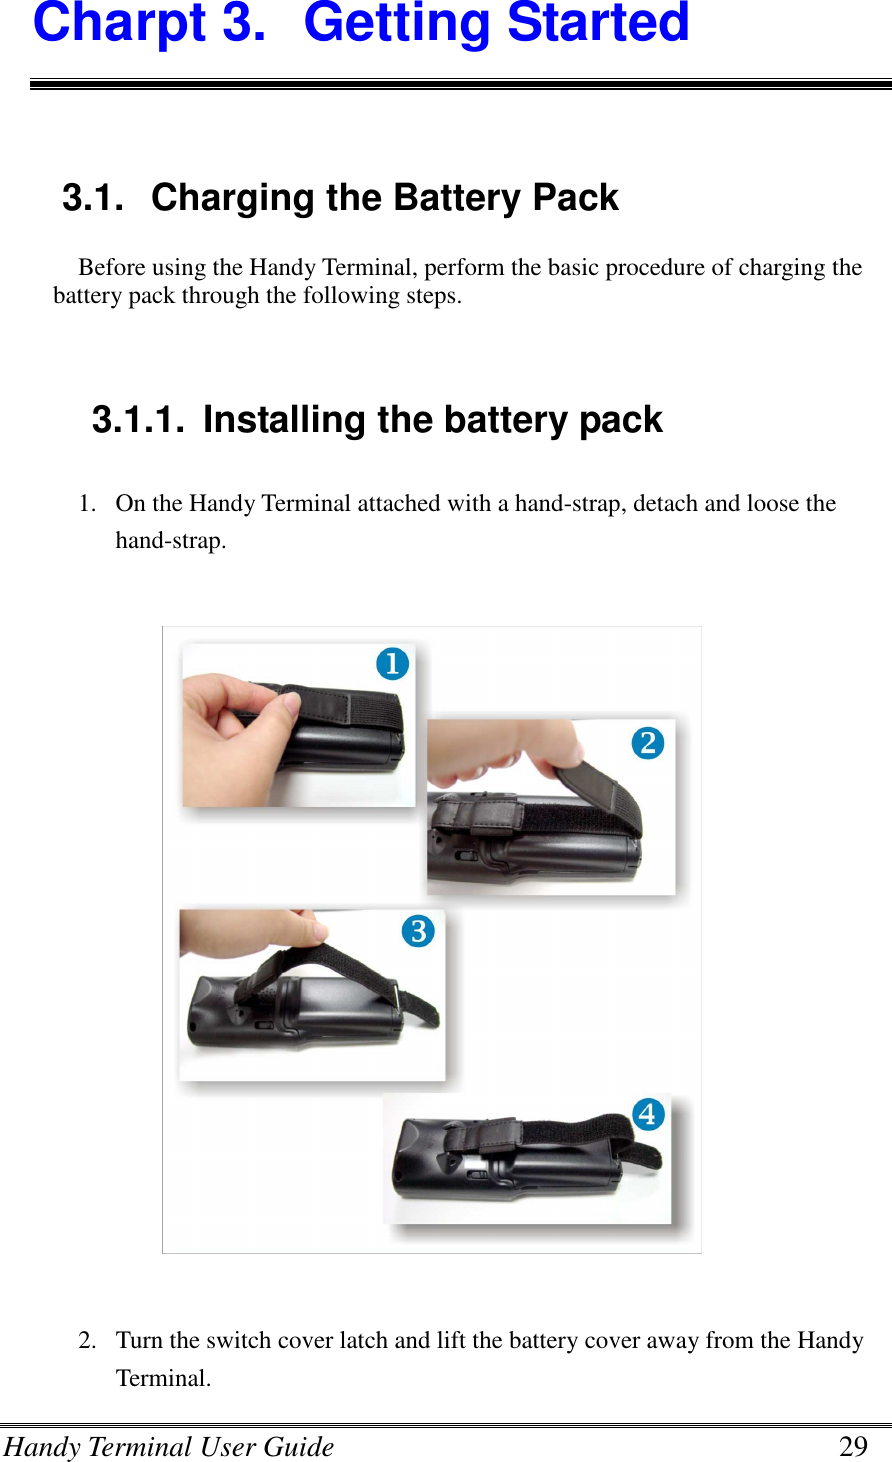 Handy Terminal User Guide      29 Charpt 3.  Getting Started  3.1.  Charging the Battery Pack Before using the Handy Terminal, perform the basic procedure of charging the battery pack through the following steps.   3.1.1.  Installing the battery pack 1. On the Handy Terminal attached with a hand-strap, detach and loose the hand-strap.    2. Turn the switch cover latch and lift the battery cover away from the Handy Terminal. 